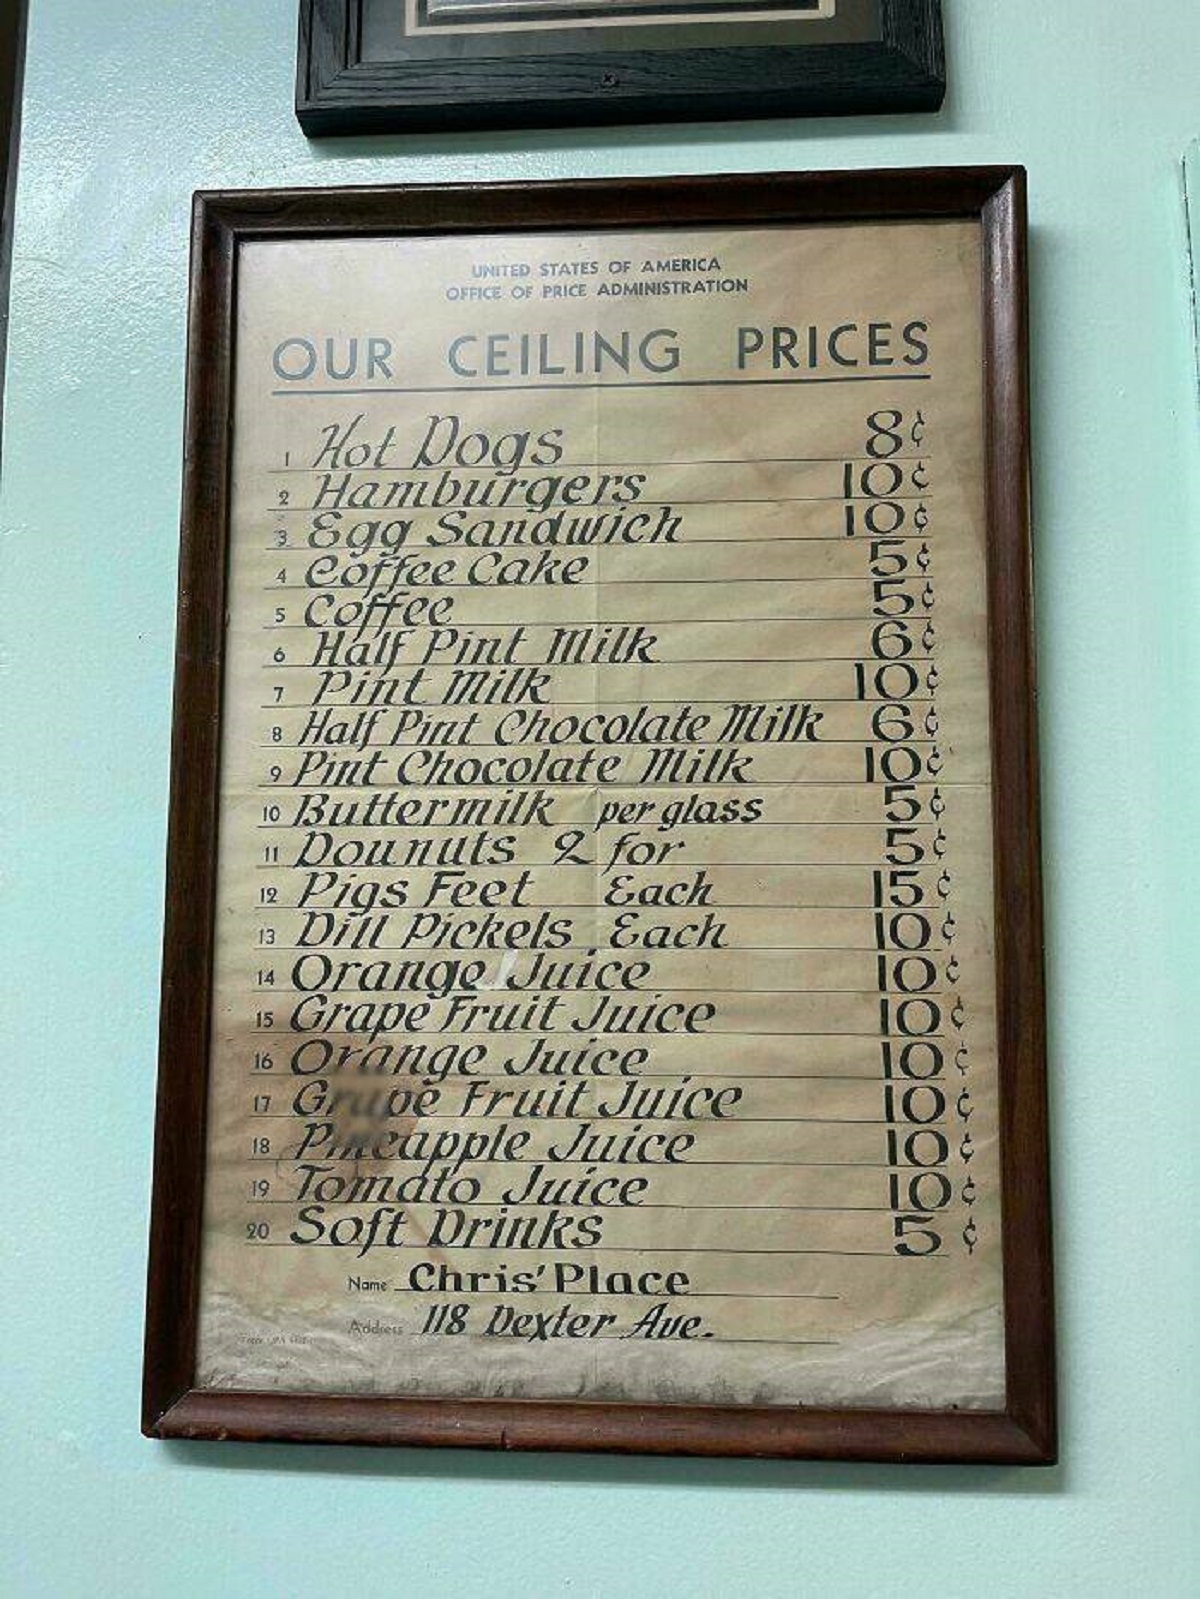 "This 107 Year Old Hot Dog Place’s Original Menu Prices"